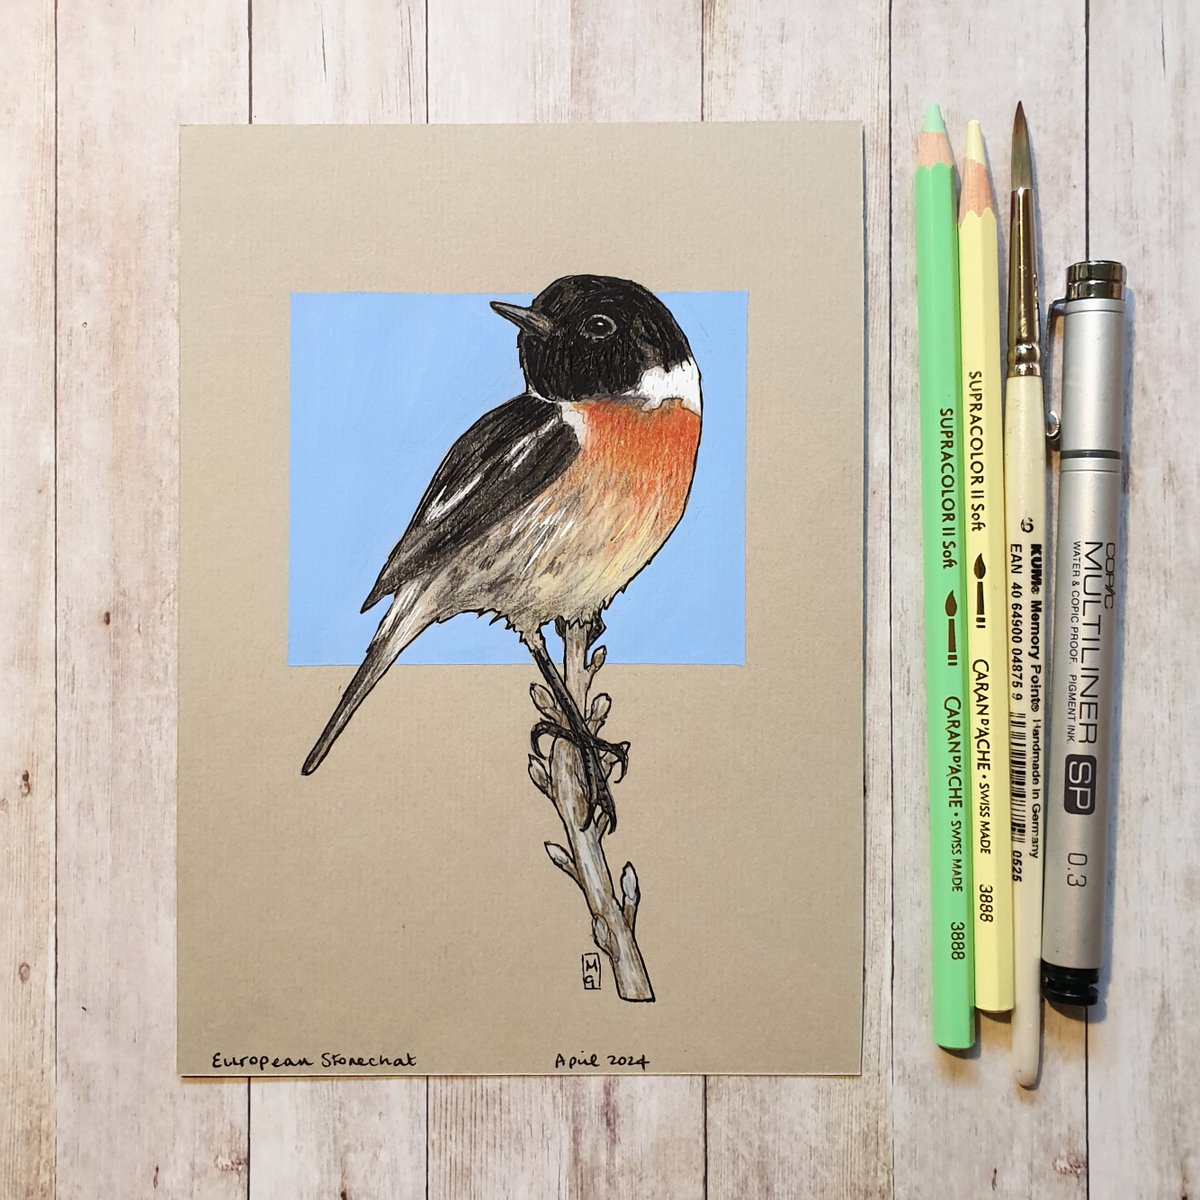 🔴This drawing is now sold, thank you.
If you are interested in seeing or purchasing my art, I'd love you to visit my Etsy shop.
*shop link in my profile
#OriginalArt #drawing #PenAndInk #ColourPencil 
#MixedMedia #art #TraditionalArt #bird #Birds #BirdDrawing #BirdArt